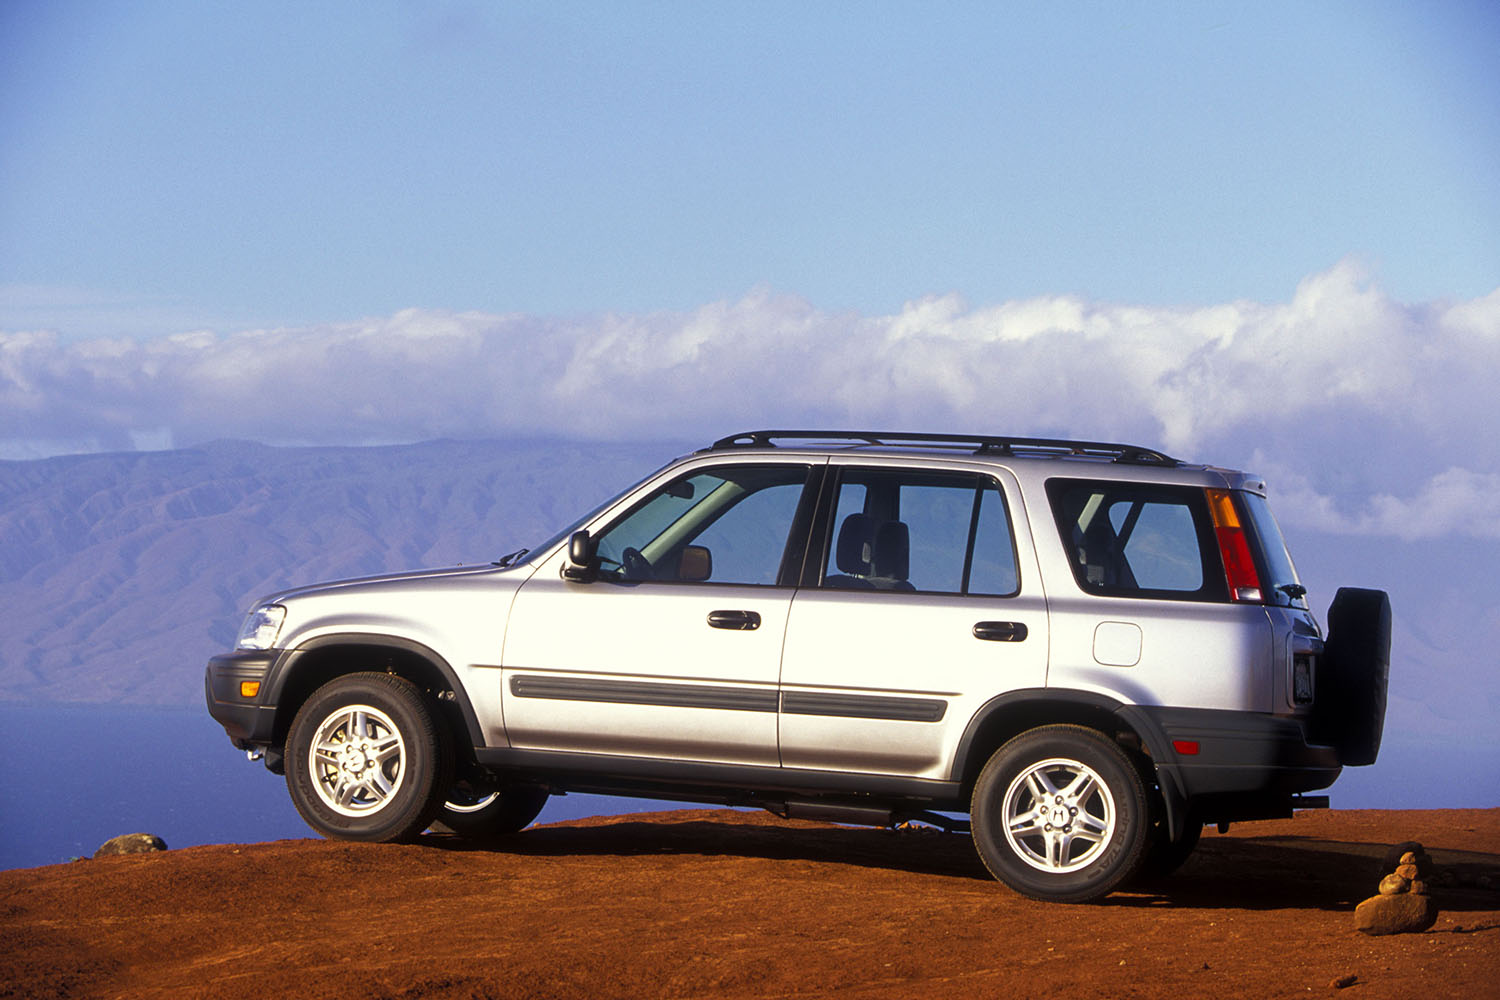 1997 Honda CR-V in silver parked on a cliff overlooking mountains and clouds.